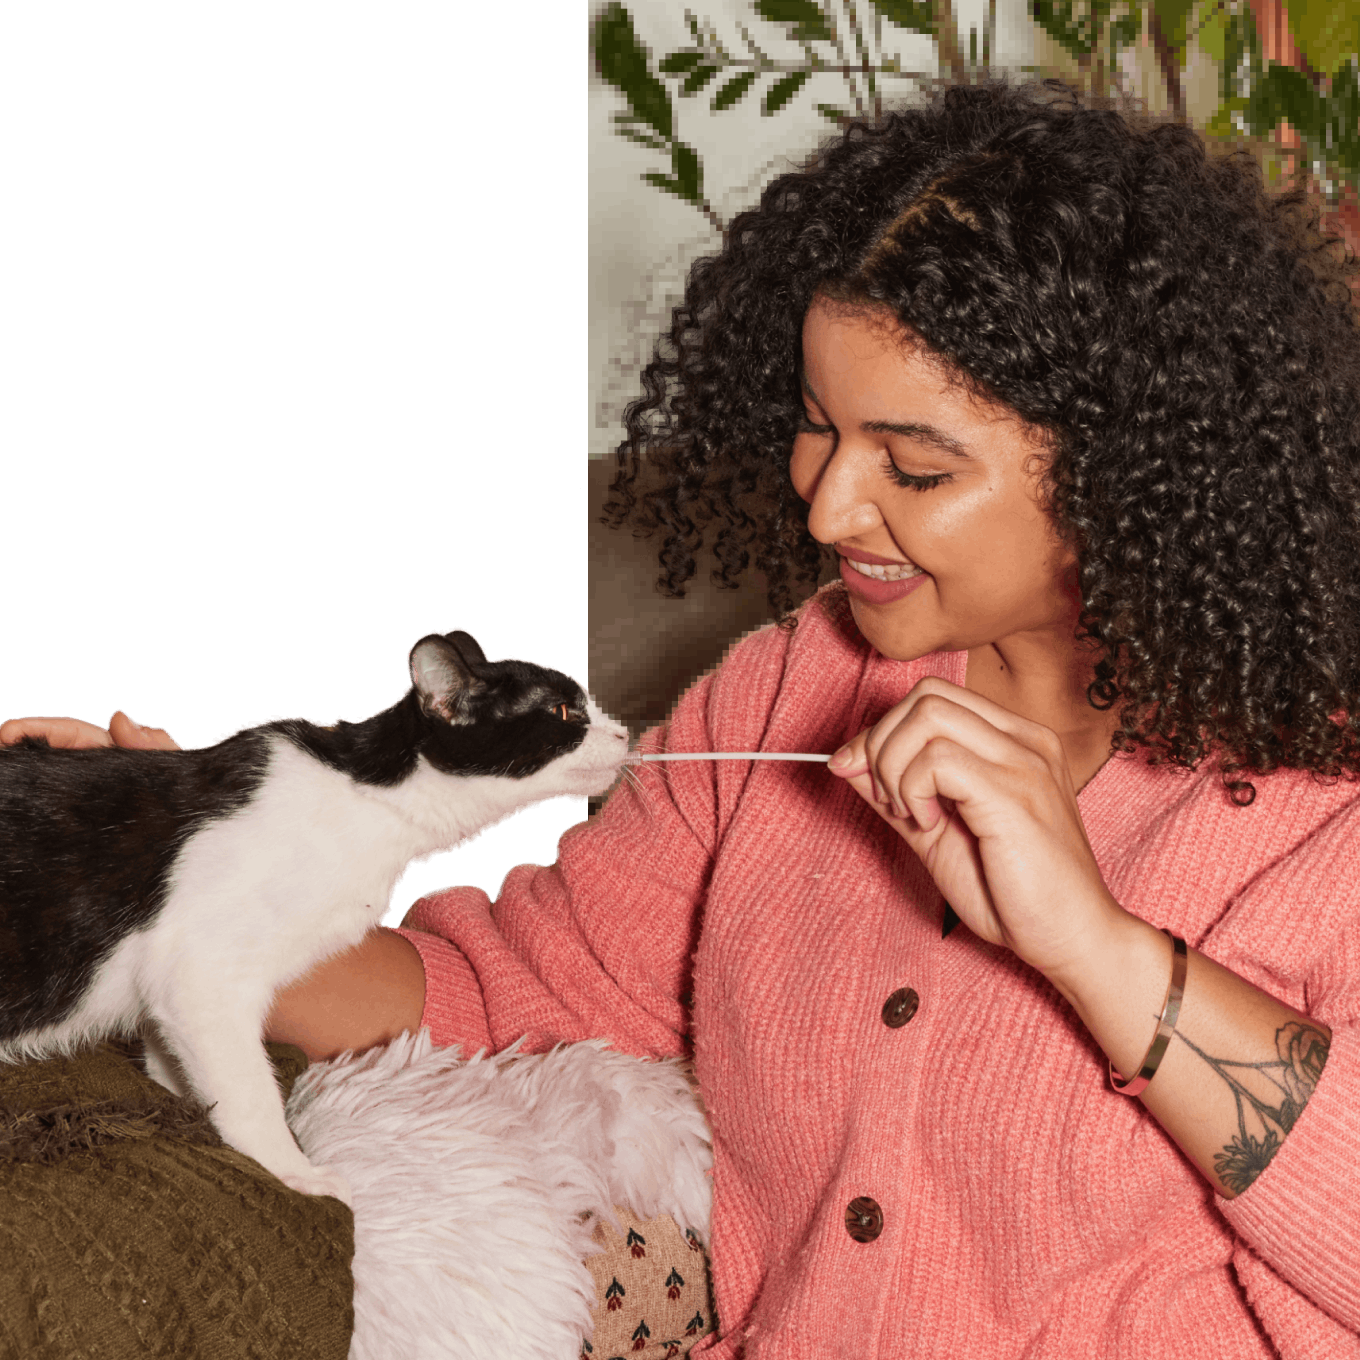 A woman swabbing a black and white cat at home